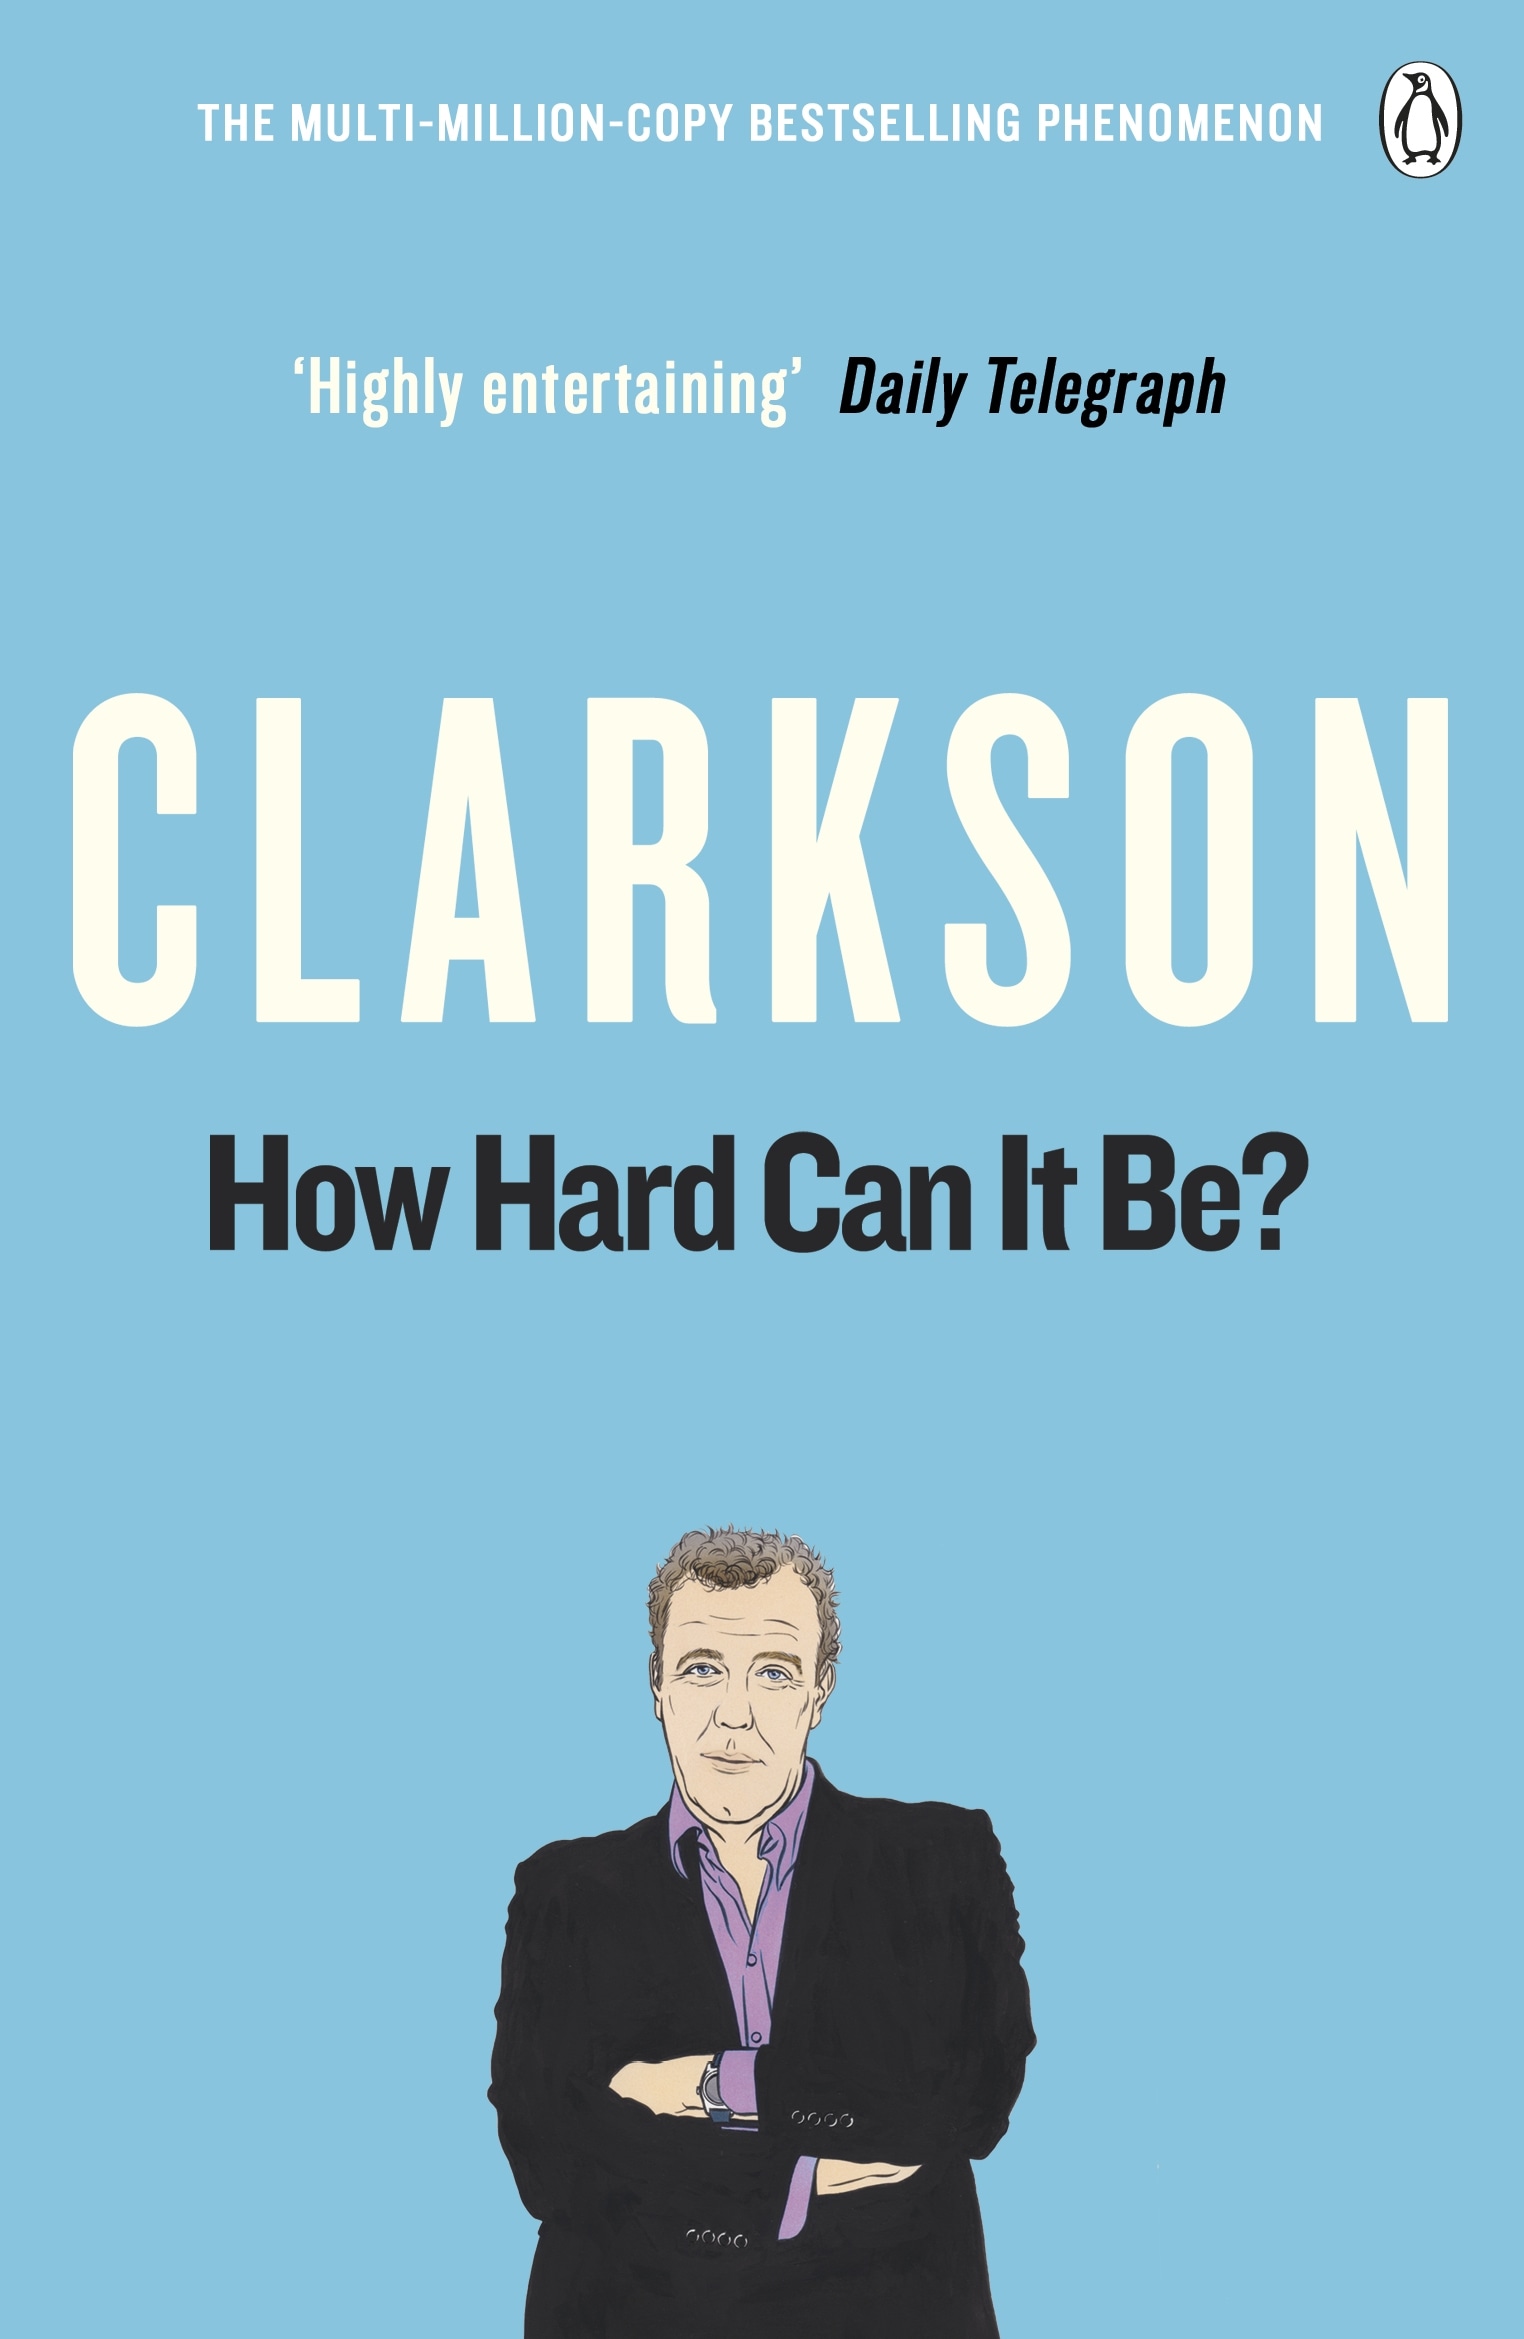 Book “How Hard Can It Be?” by Jeremy Clarkson